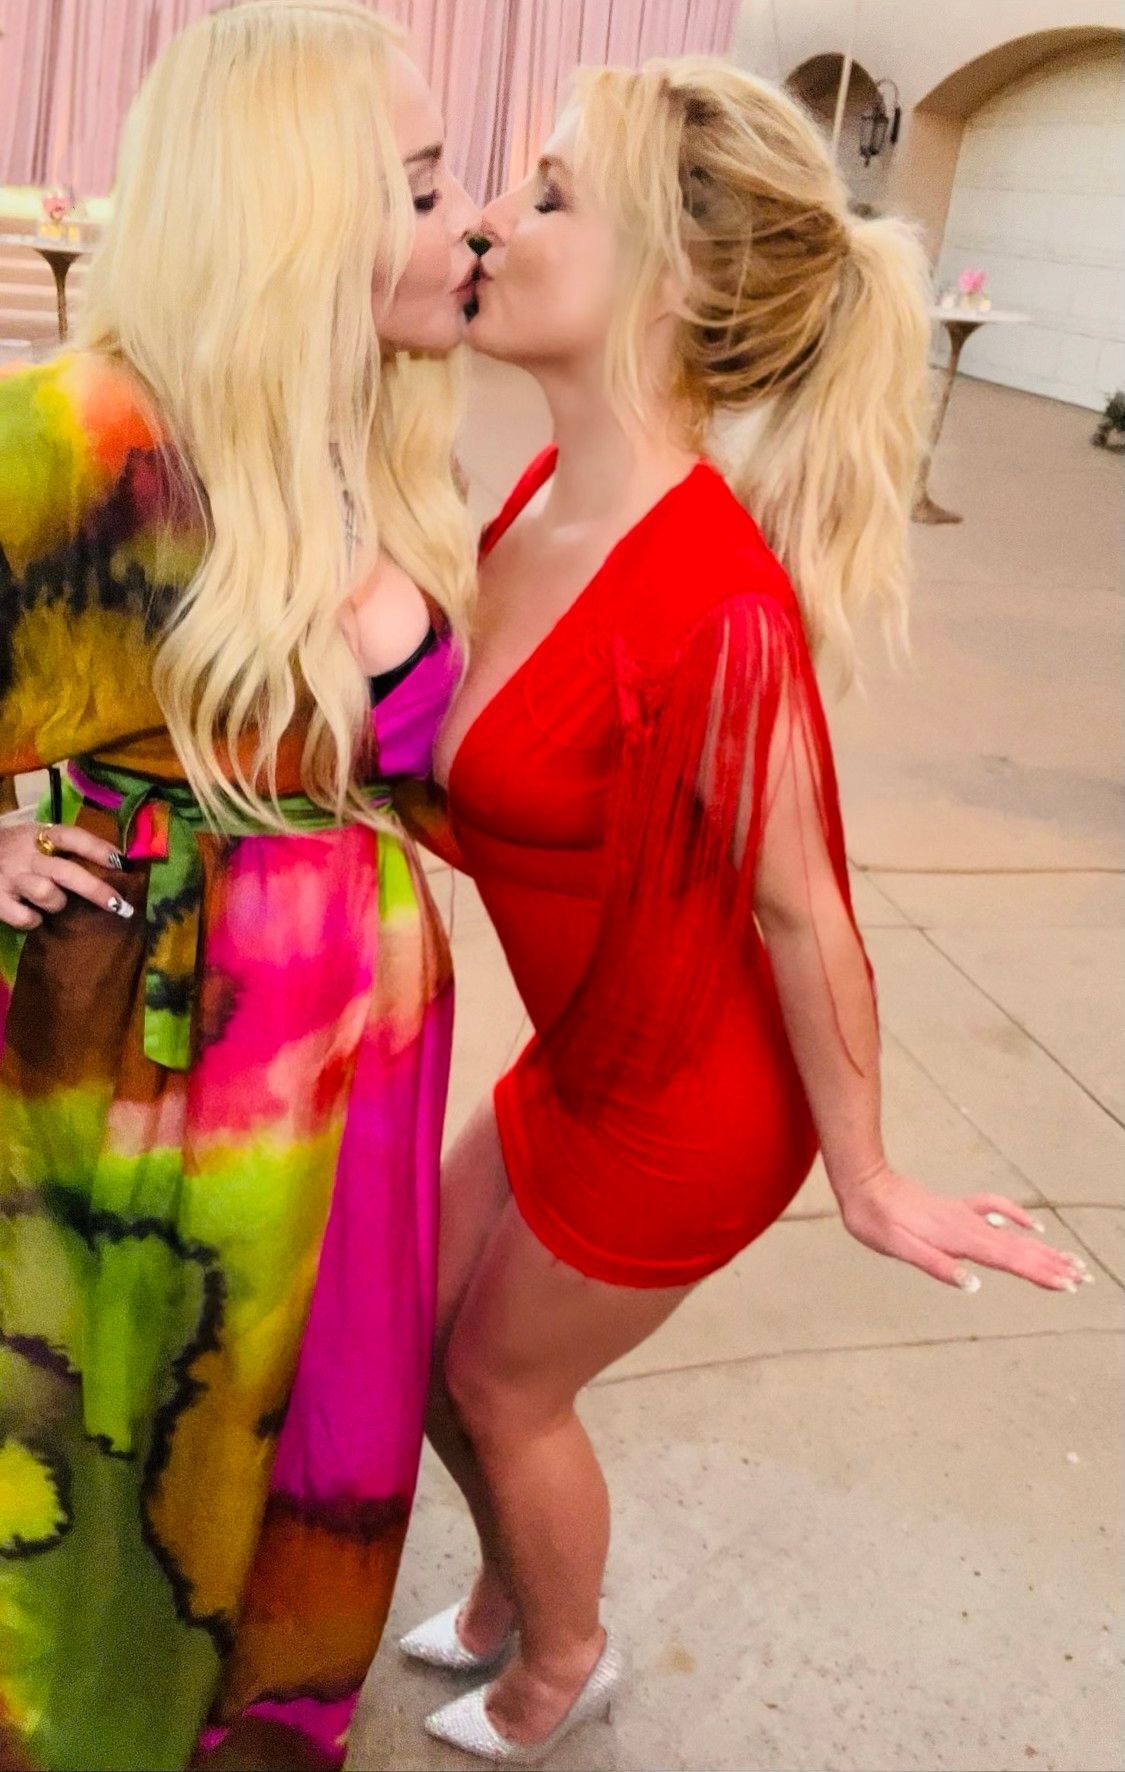 Madonna and Britney kissing